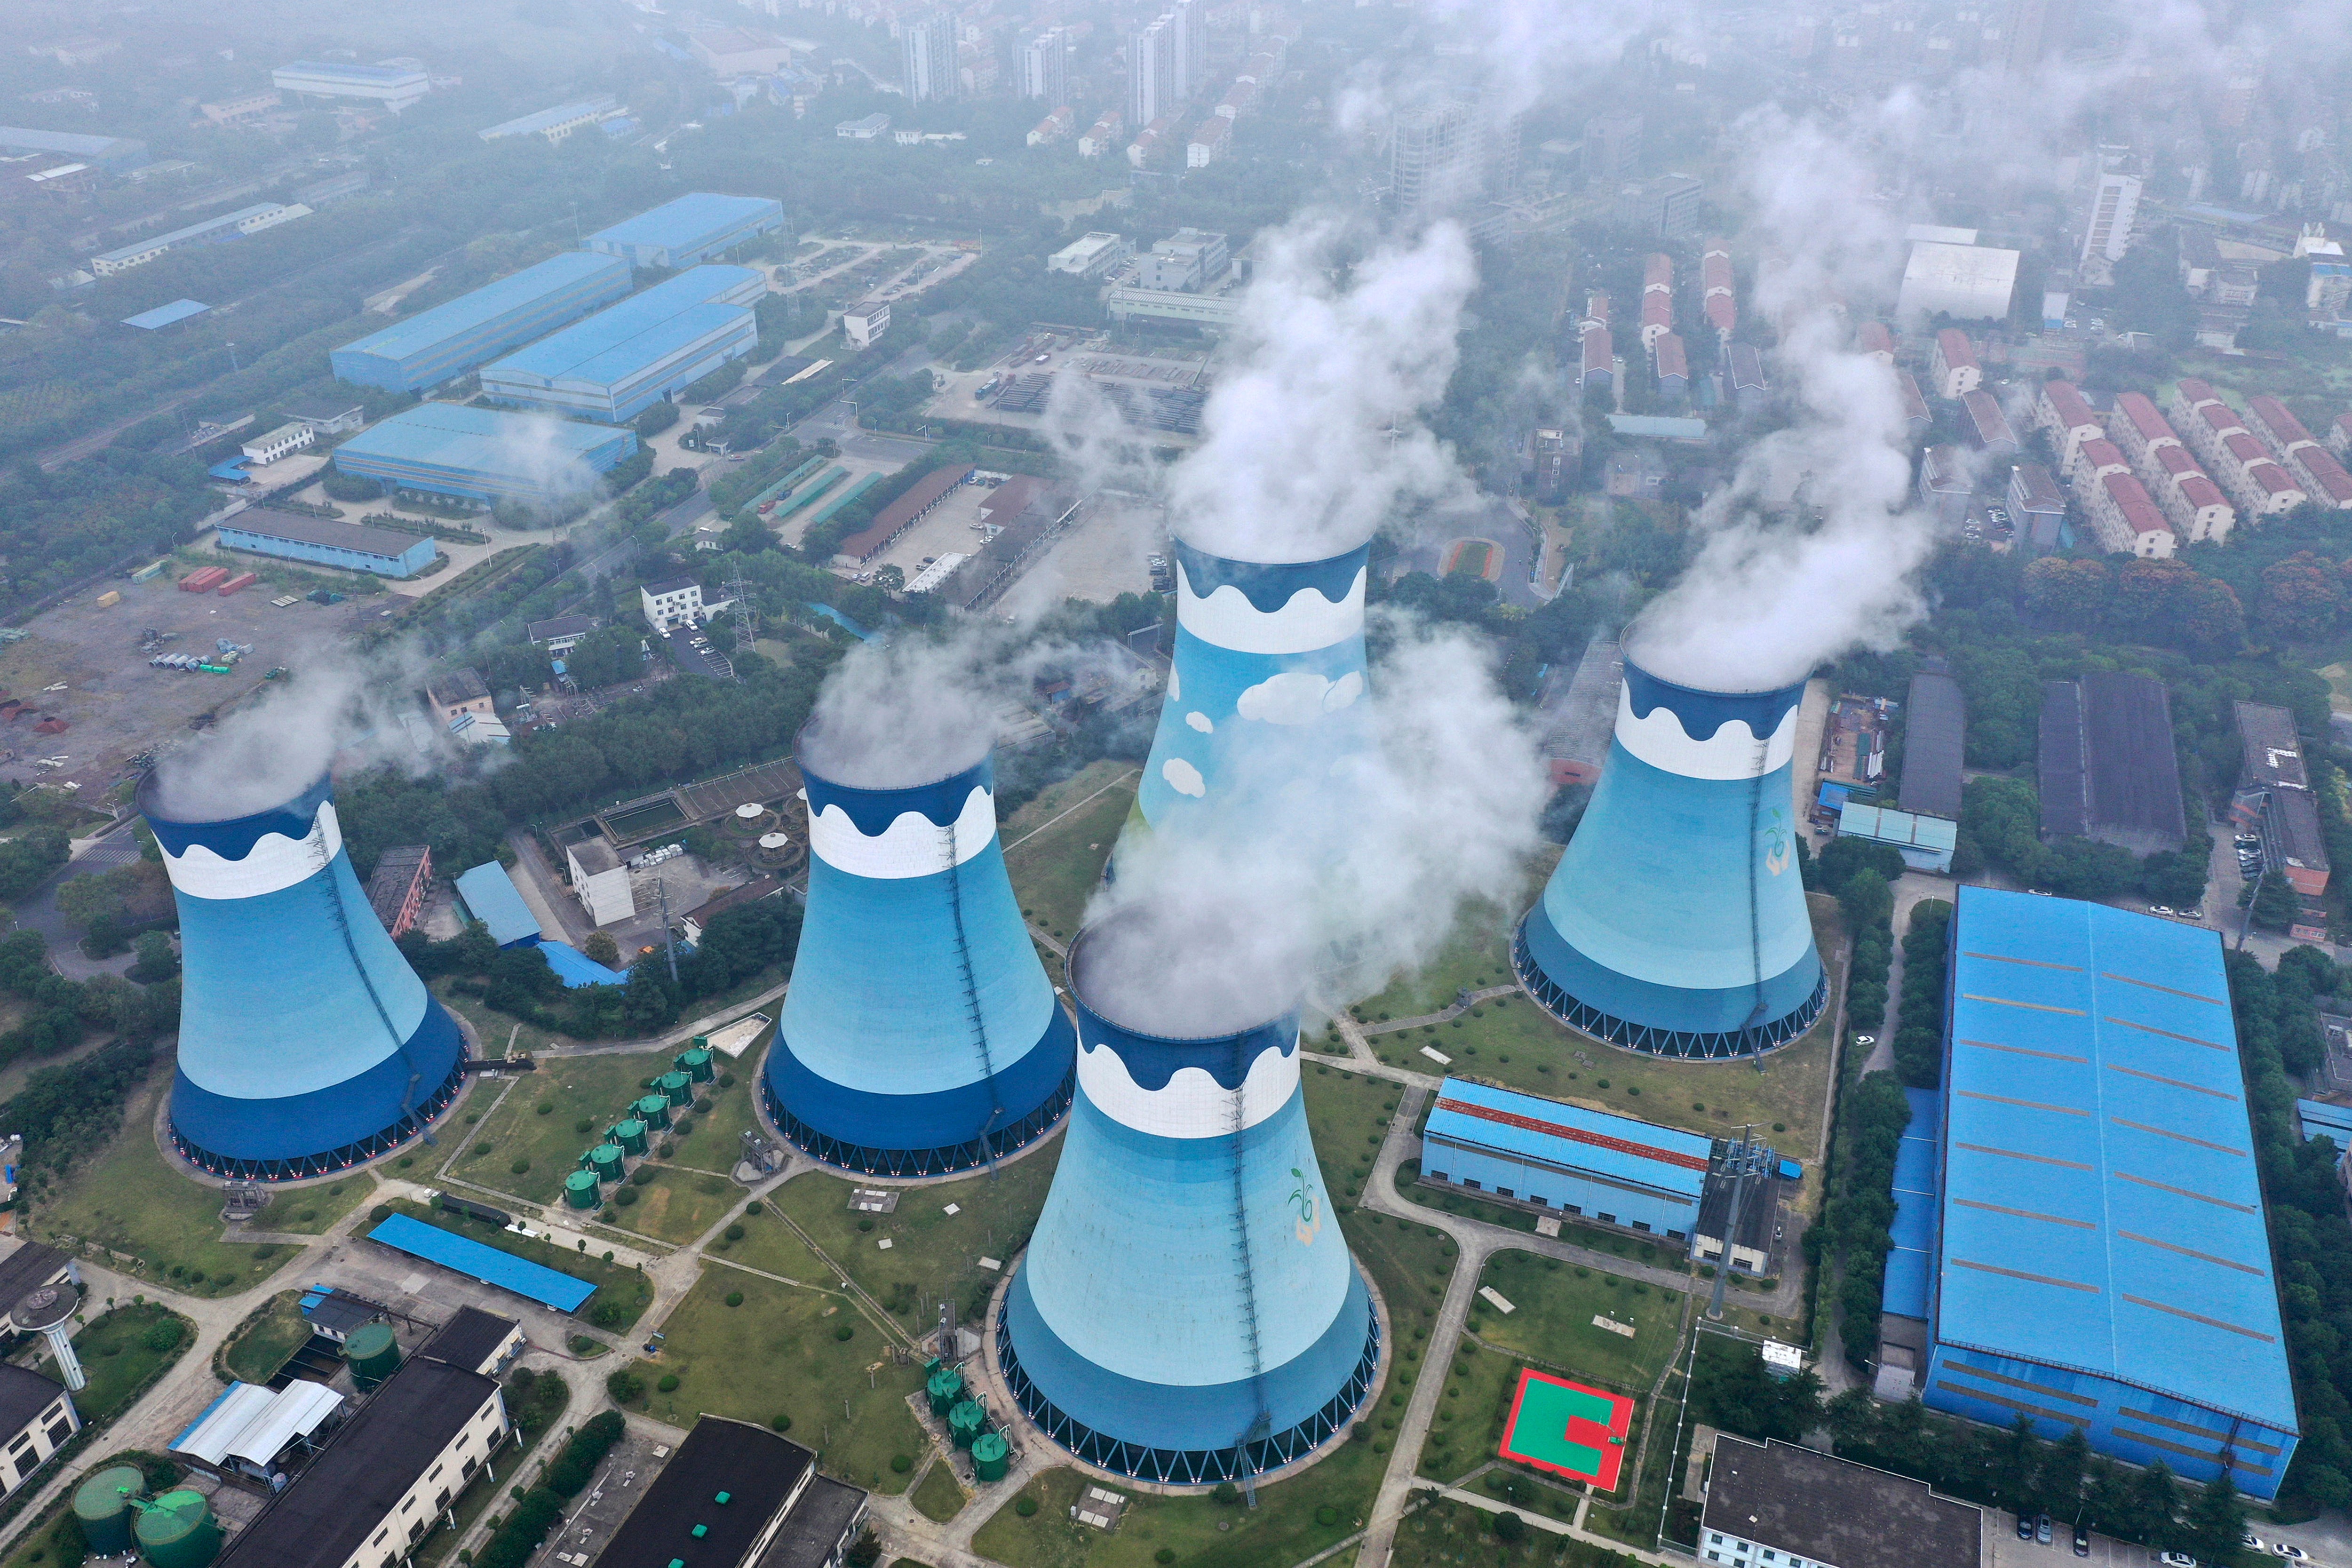 Steam billows out of the cooling towers at a coal-fired power station in Nanjing in east China's Jiangsu province